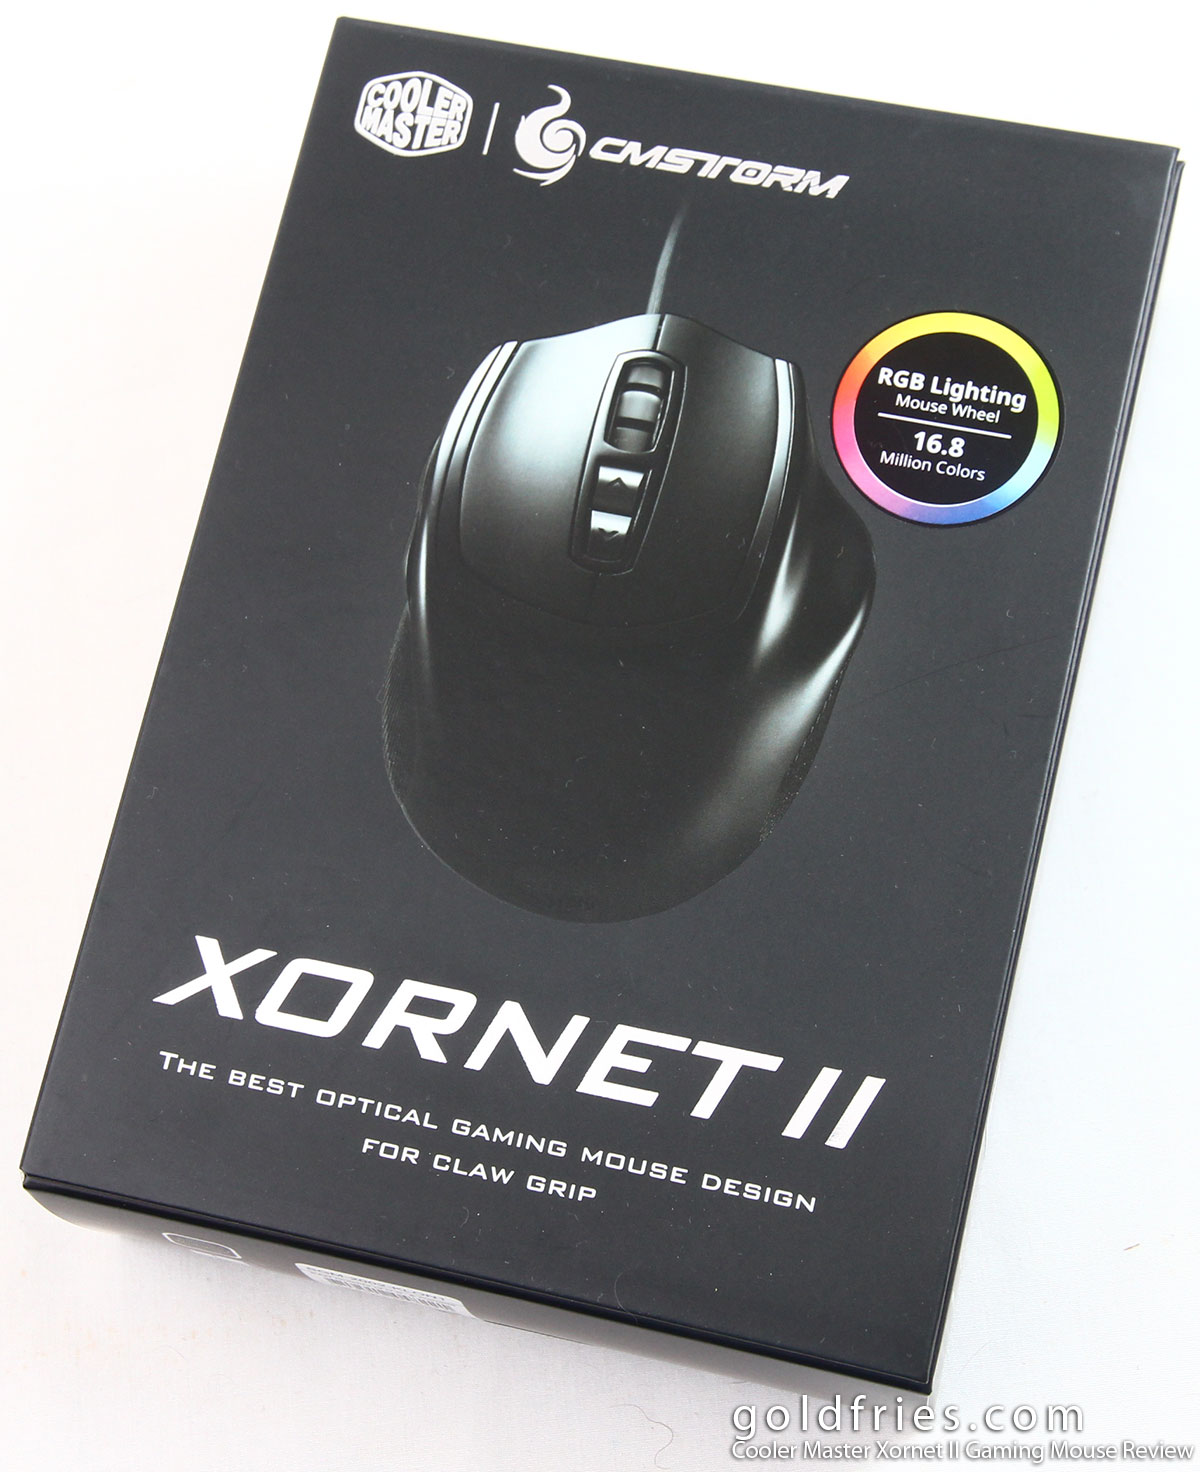 Cooler Master Xornet II Gaming Mouse Review